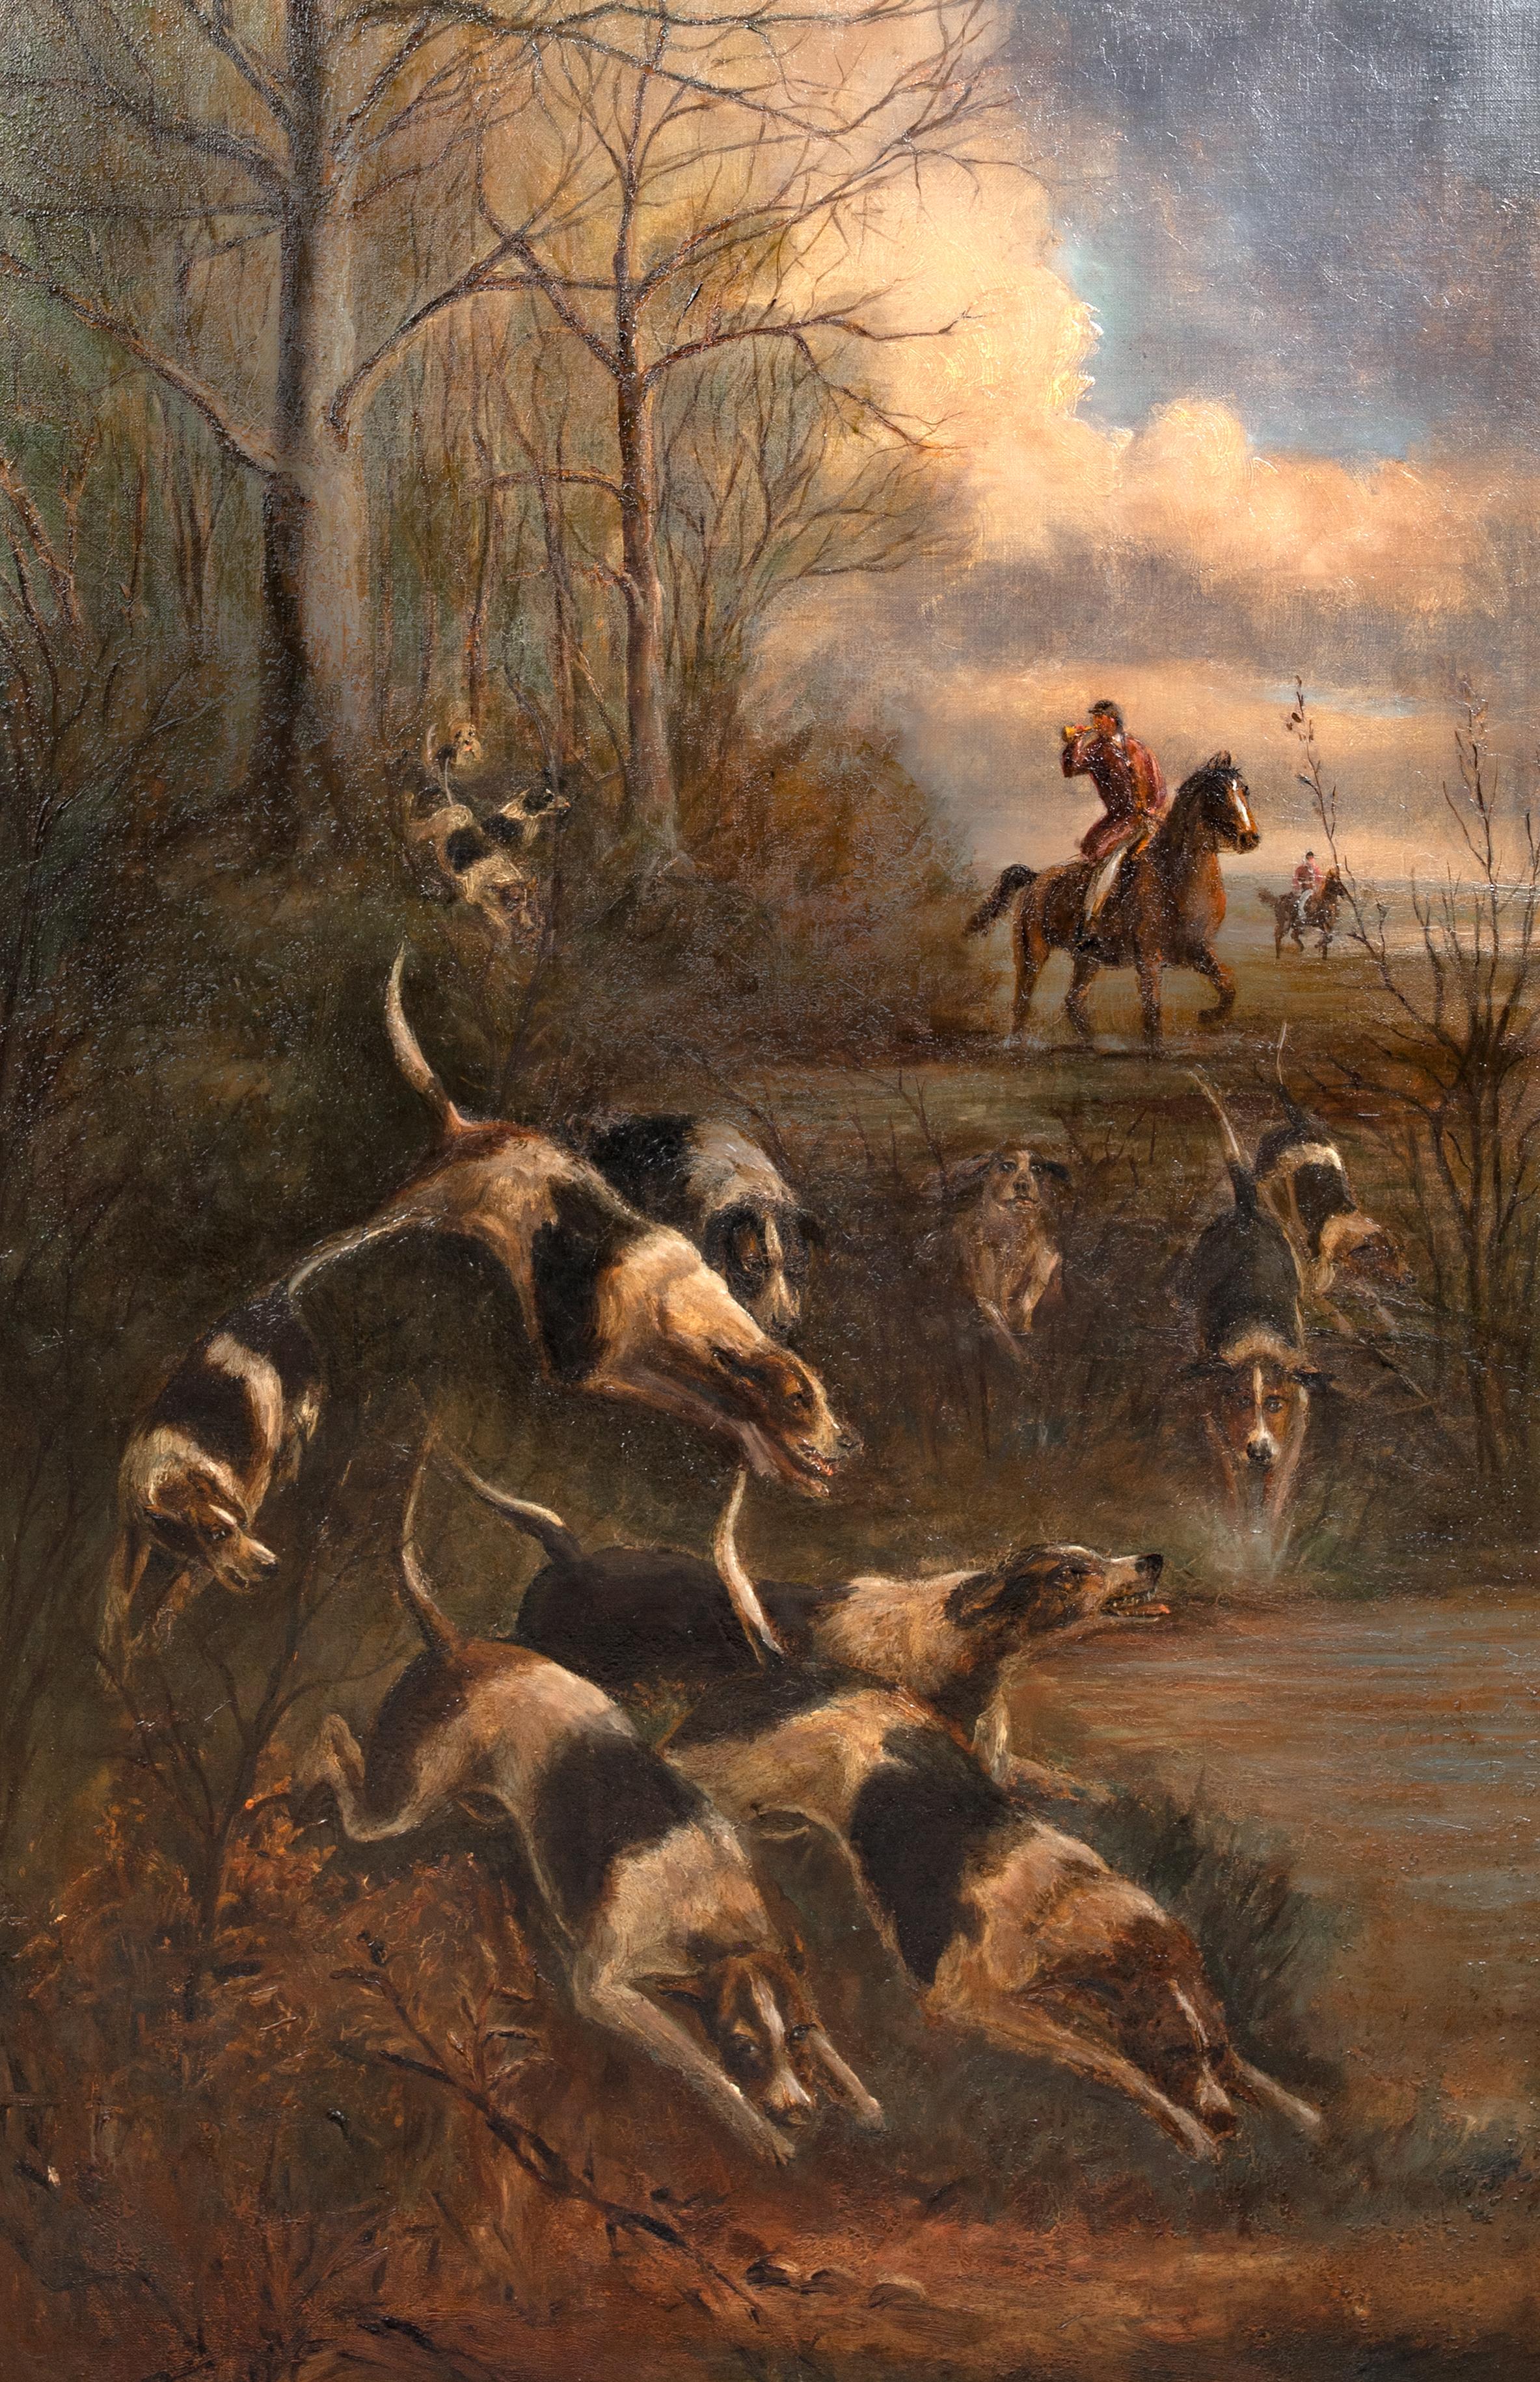 The Hounds In Full Cry, 19th Century

attributed to Thomas BLINKS (1860-1912)

Large 19th Century English Hunting scene of the hounds in full cry, oil on canvas attributed to Thomas Blinks. Superb large scale hunting scene circa 1890 typical of